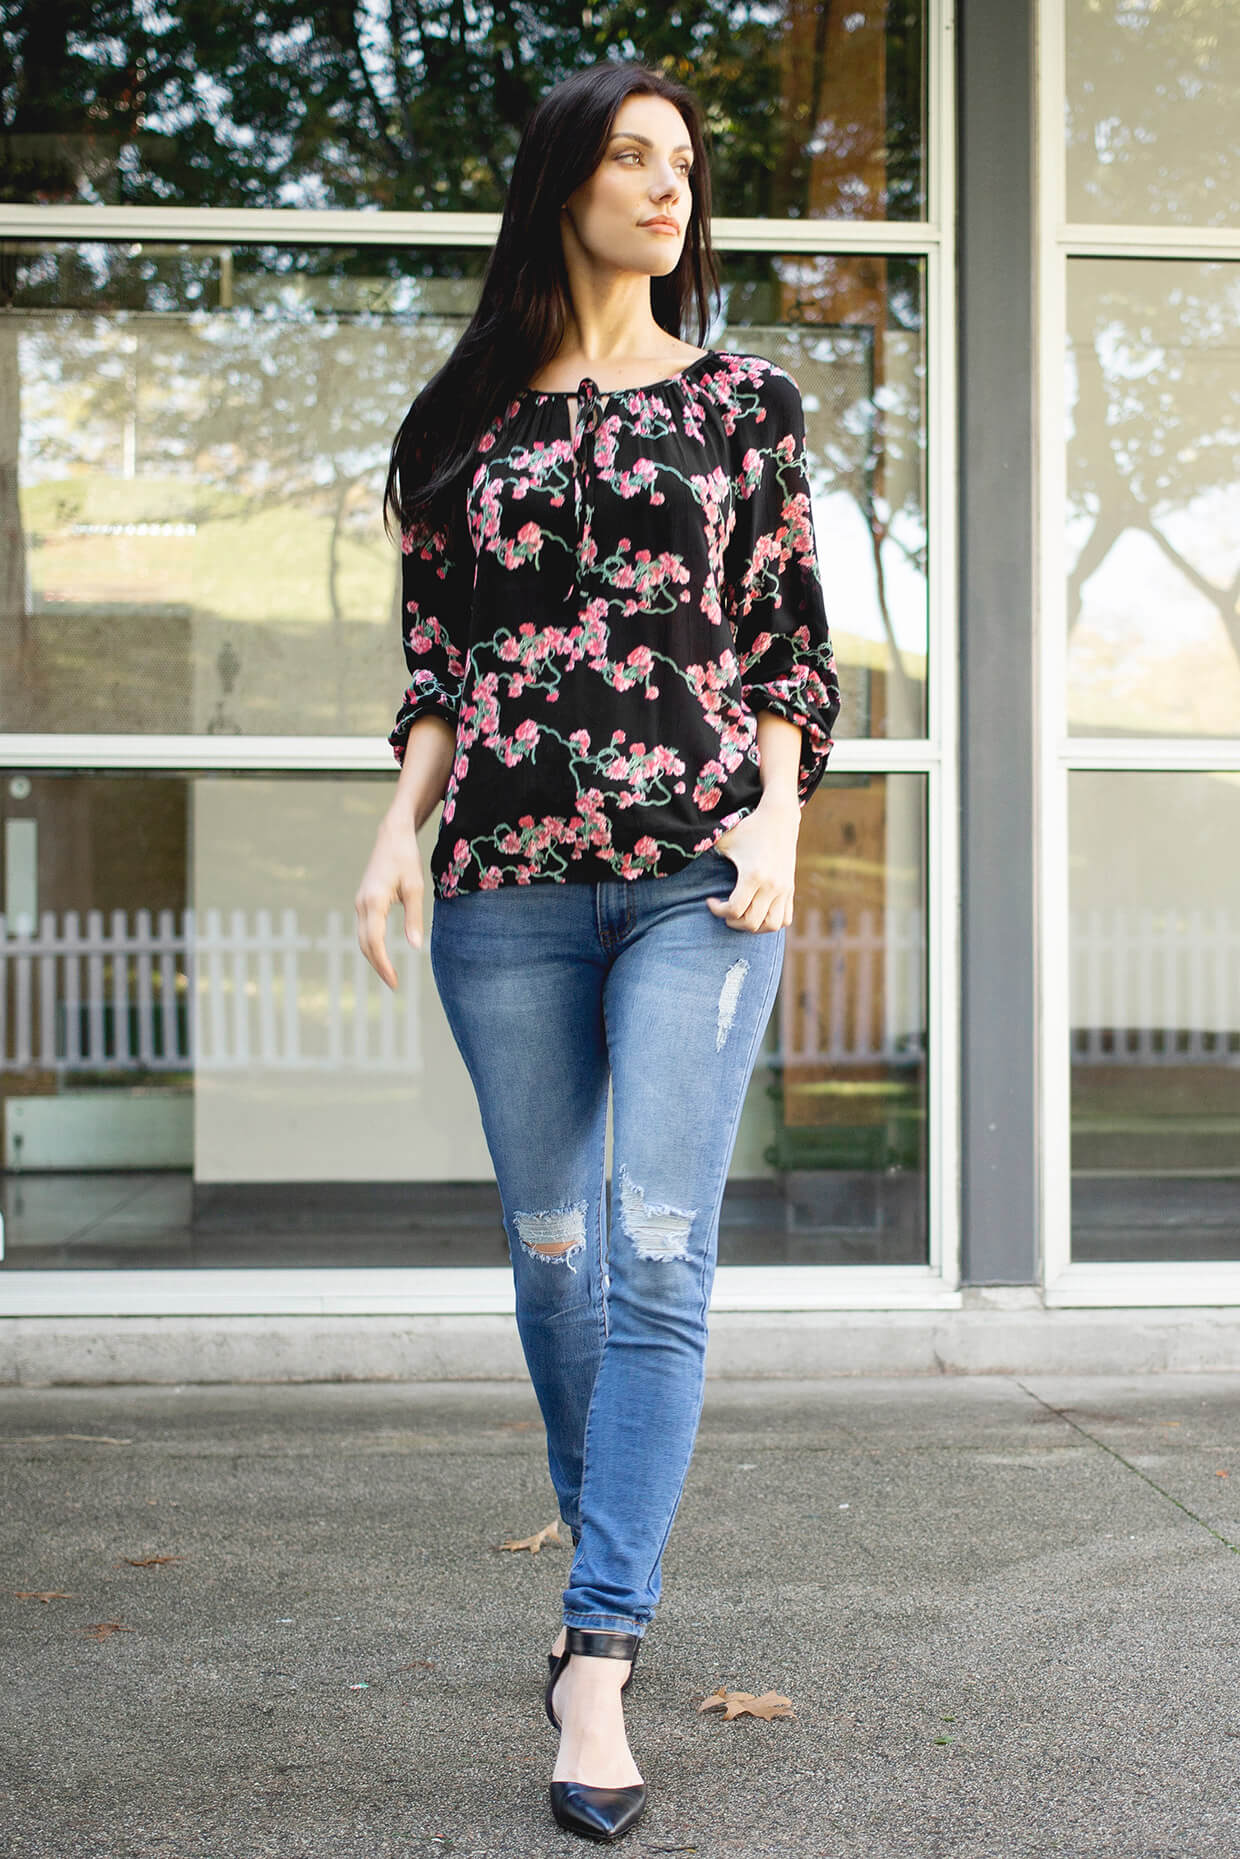 Silver Icing Flash Sale: Floral Print Top Looks for Any Occasion